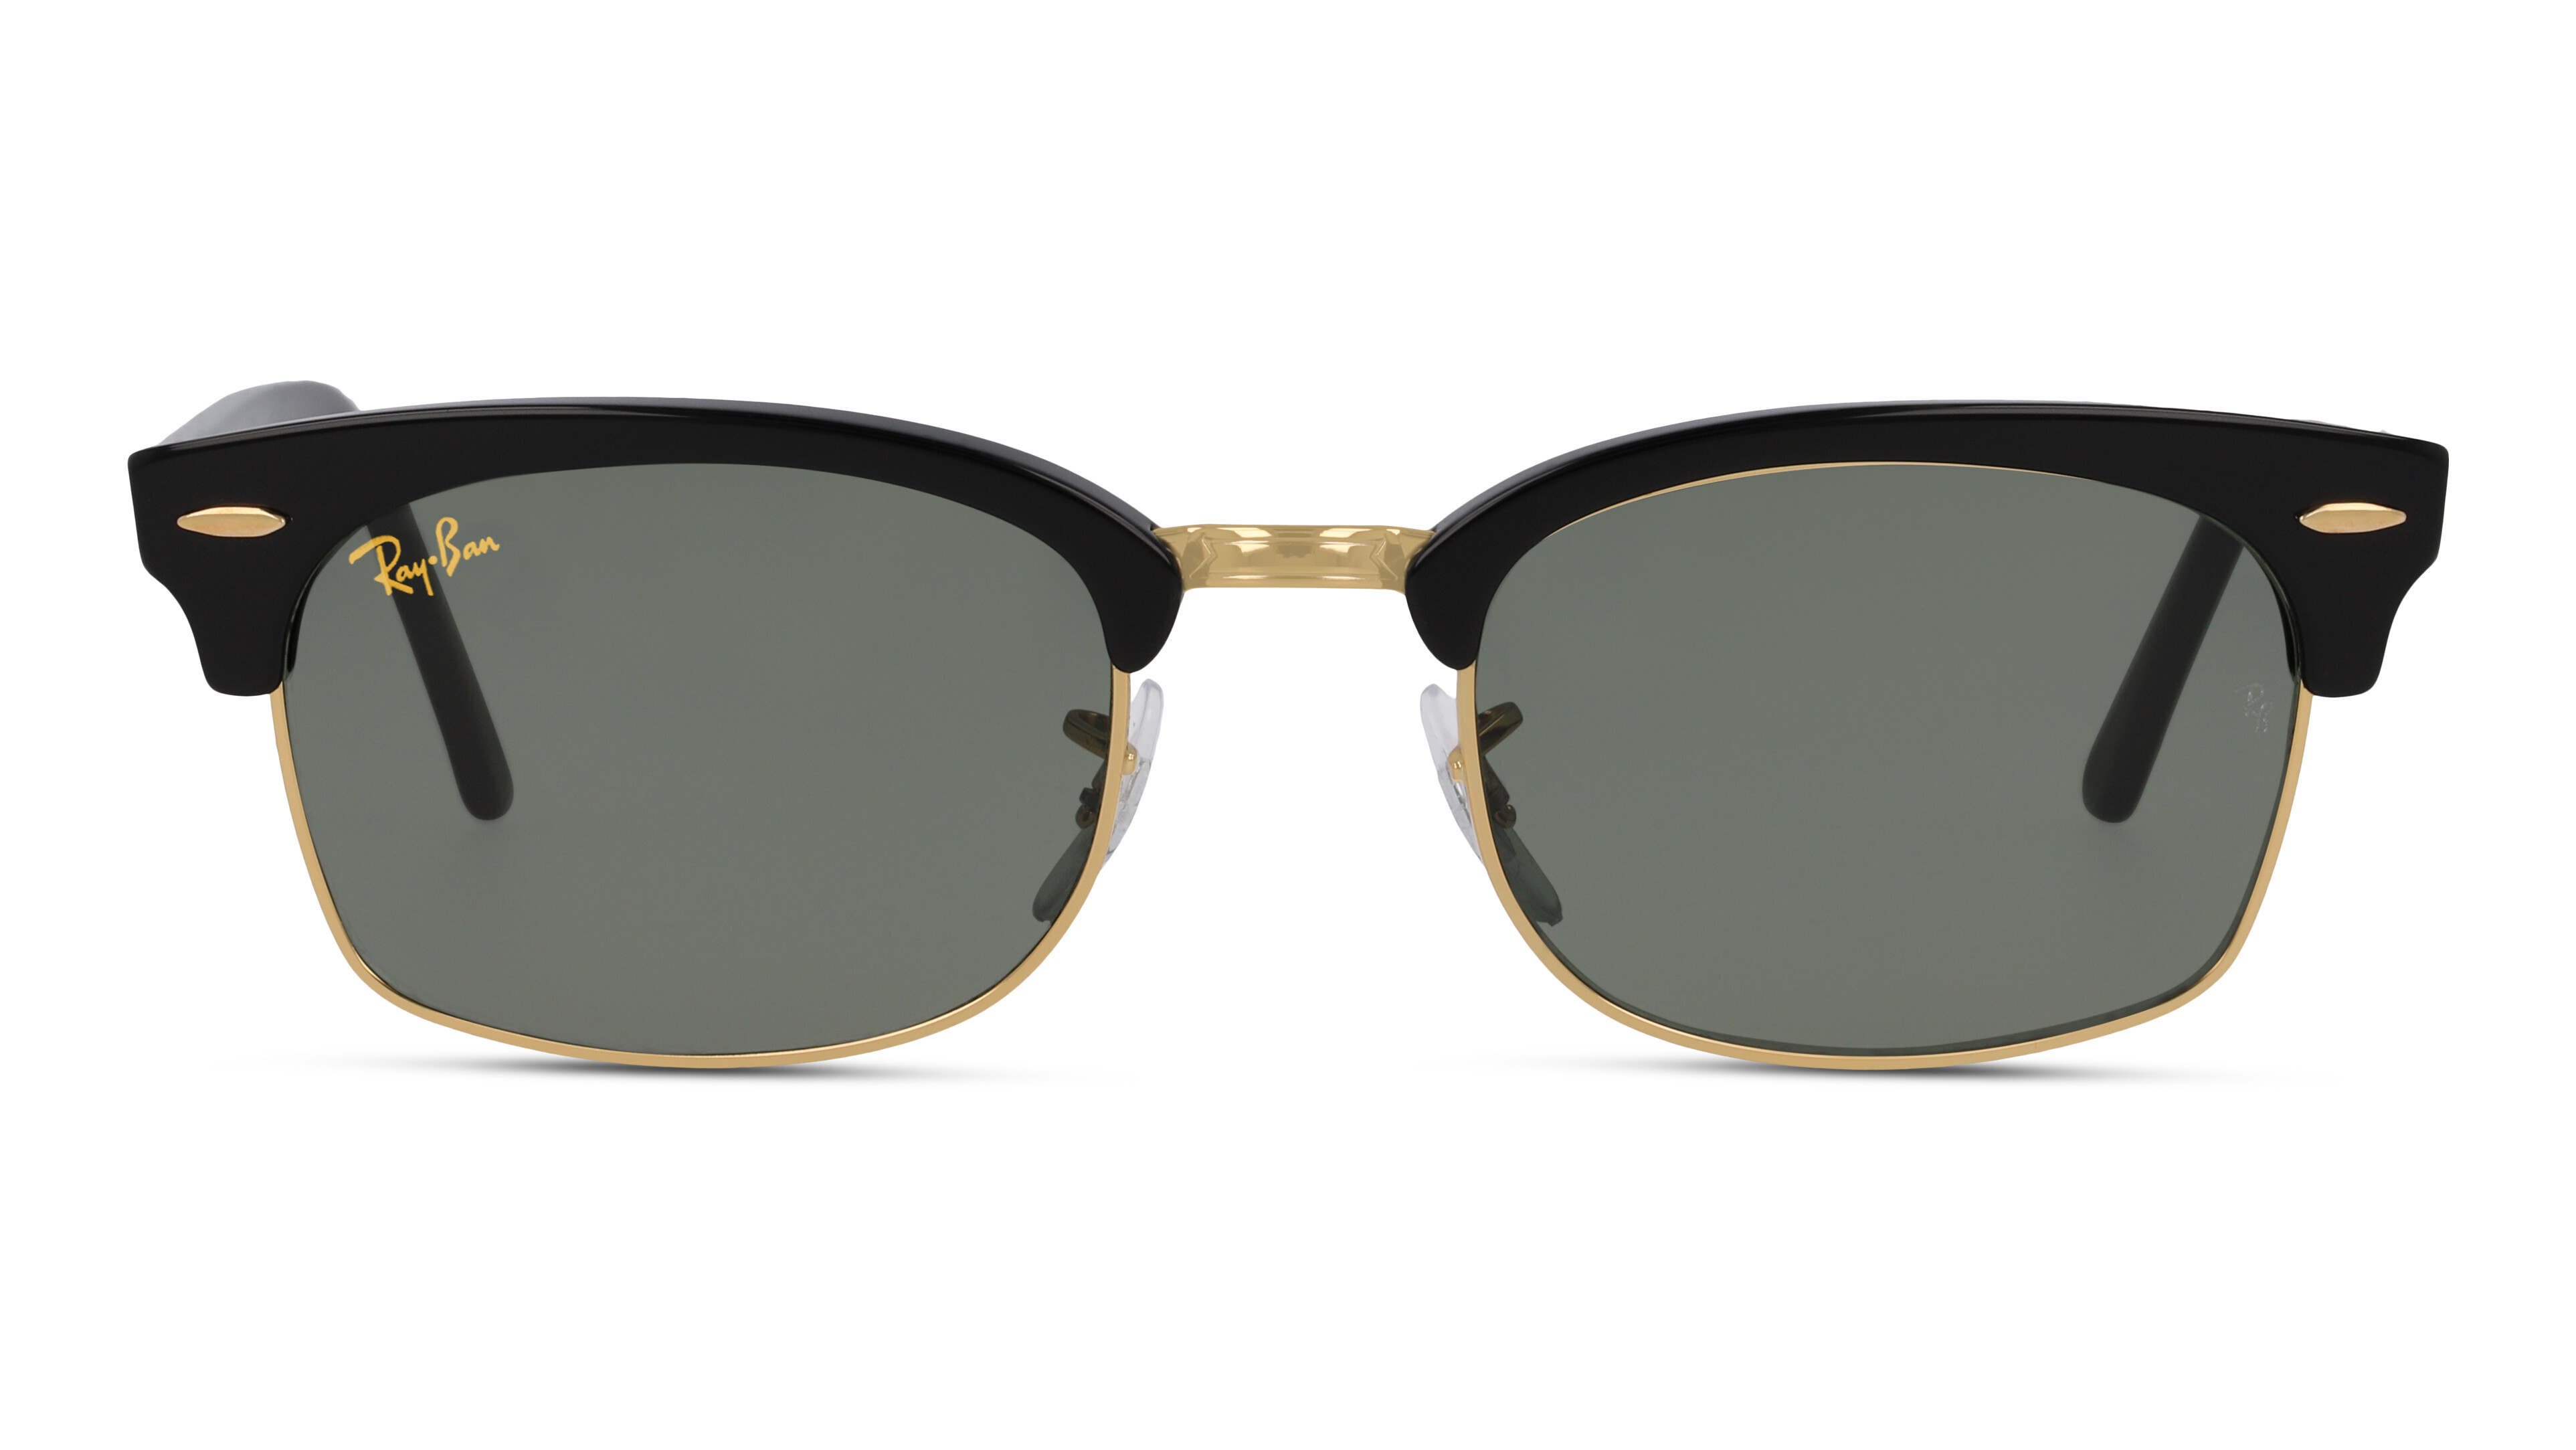 [products.image.front] Ray-Ban CLUBMASTER SQUARE 0RB3916 130331 Sonnenbrille